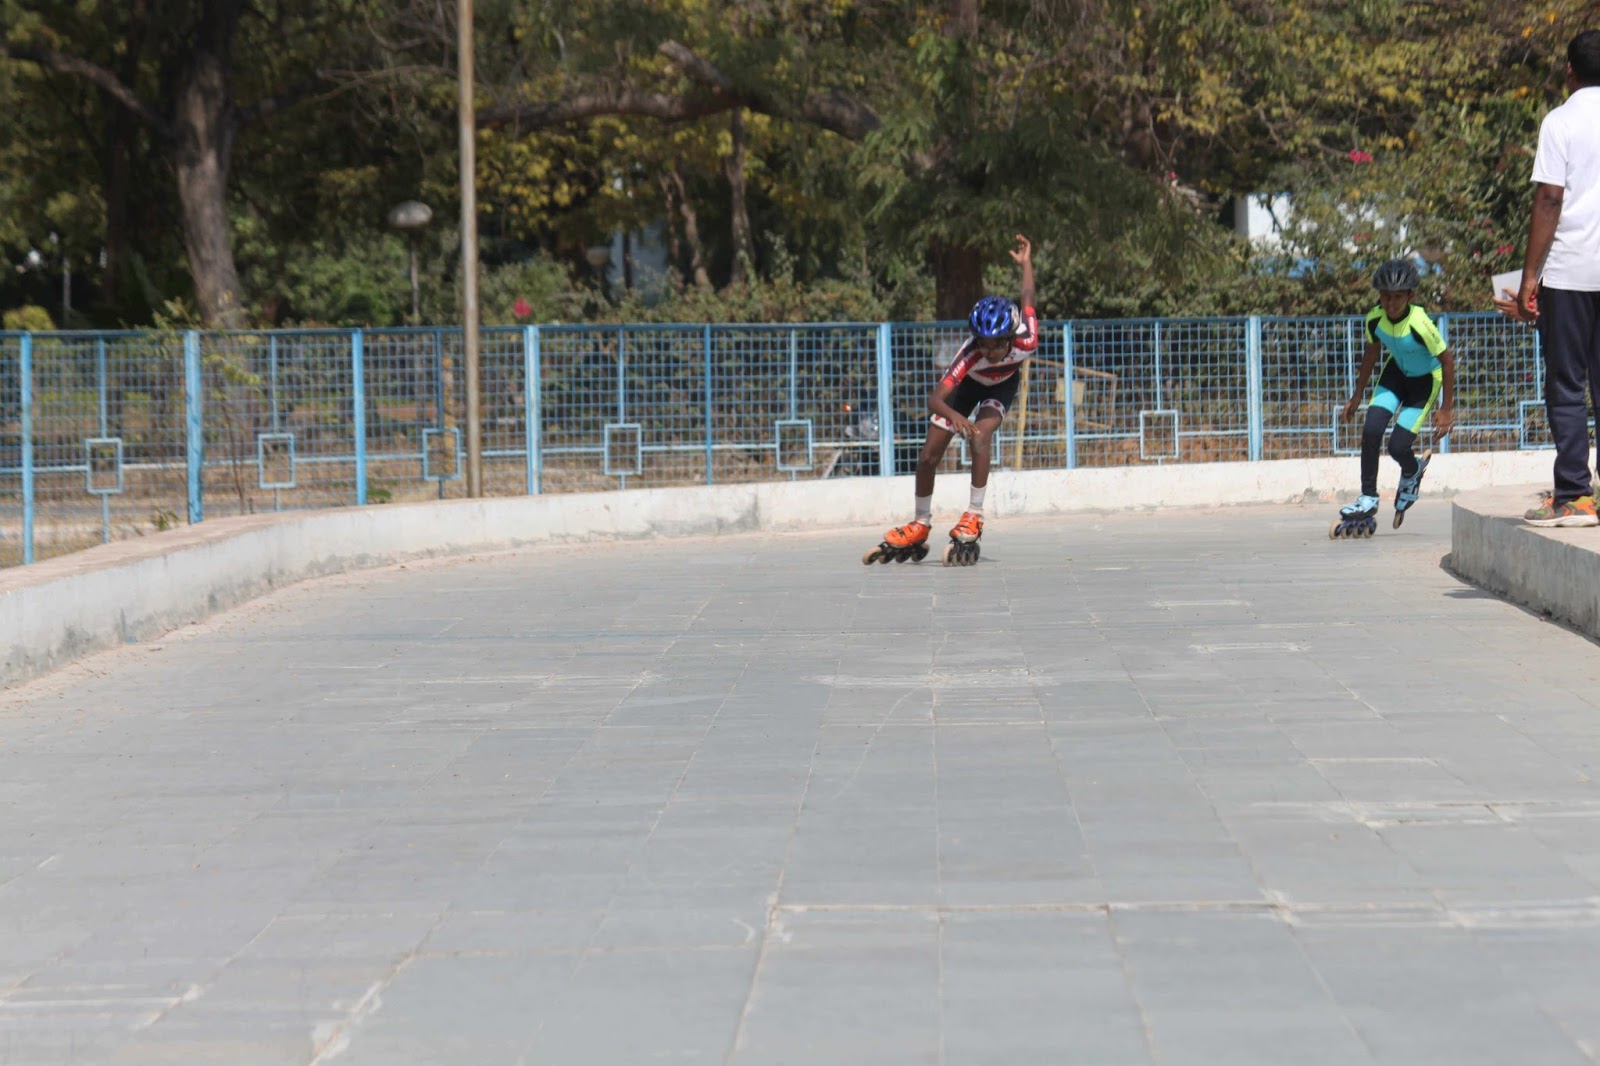 skating classes at future kids school in hyderabad skate shoes uk sizes skate shoes with four wheels